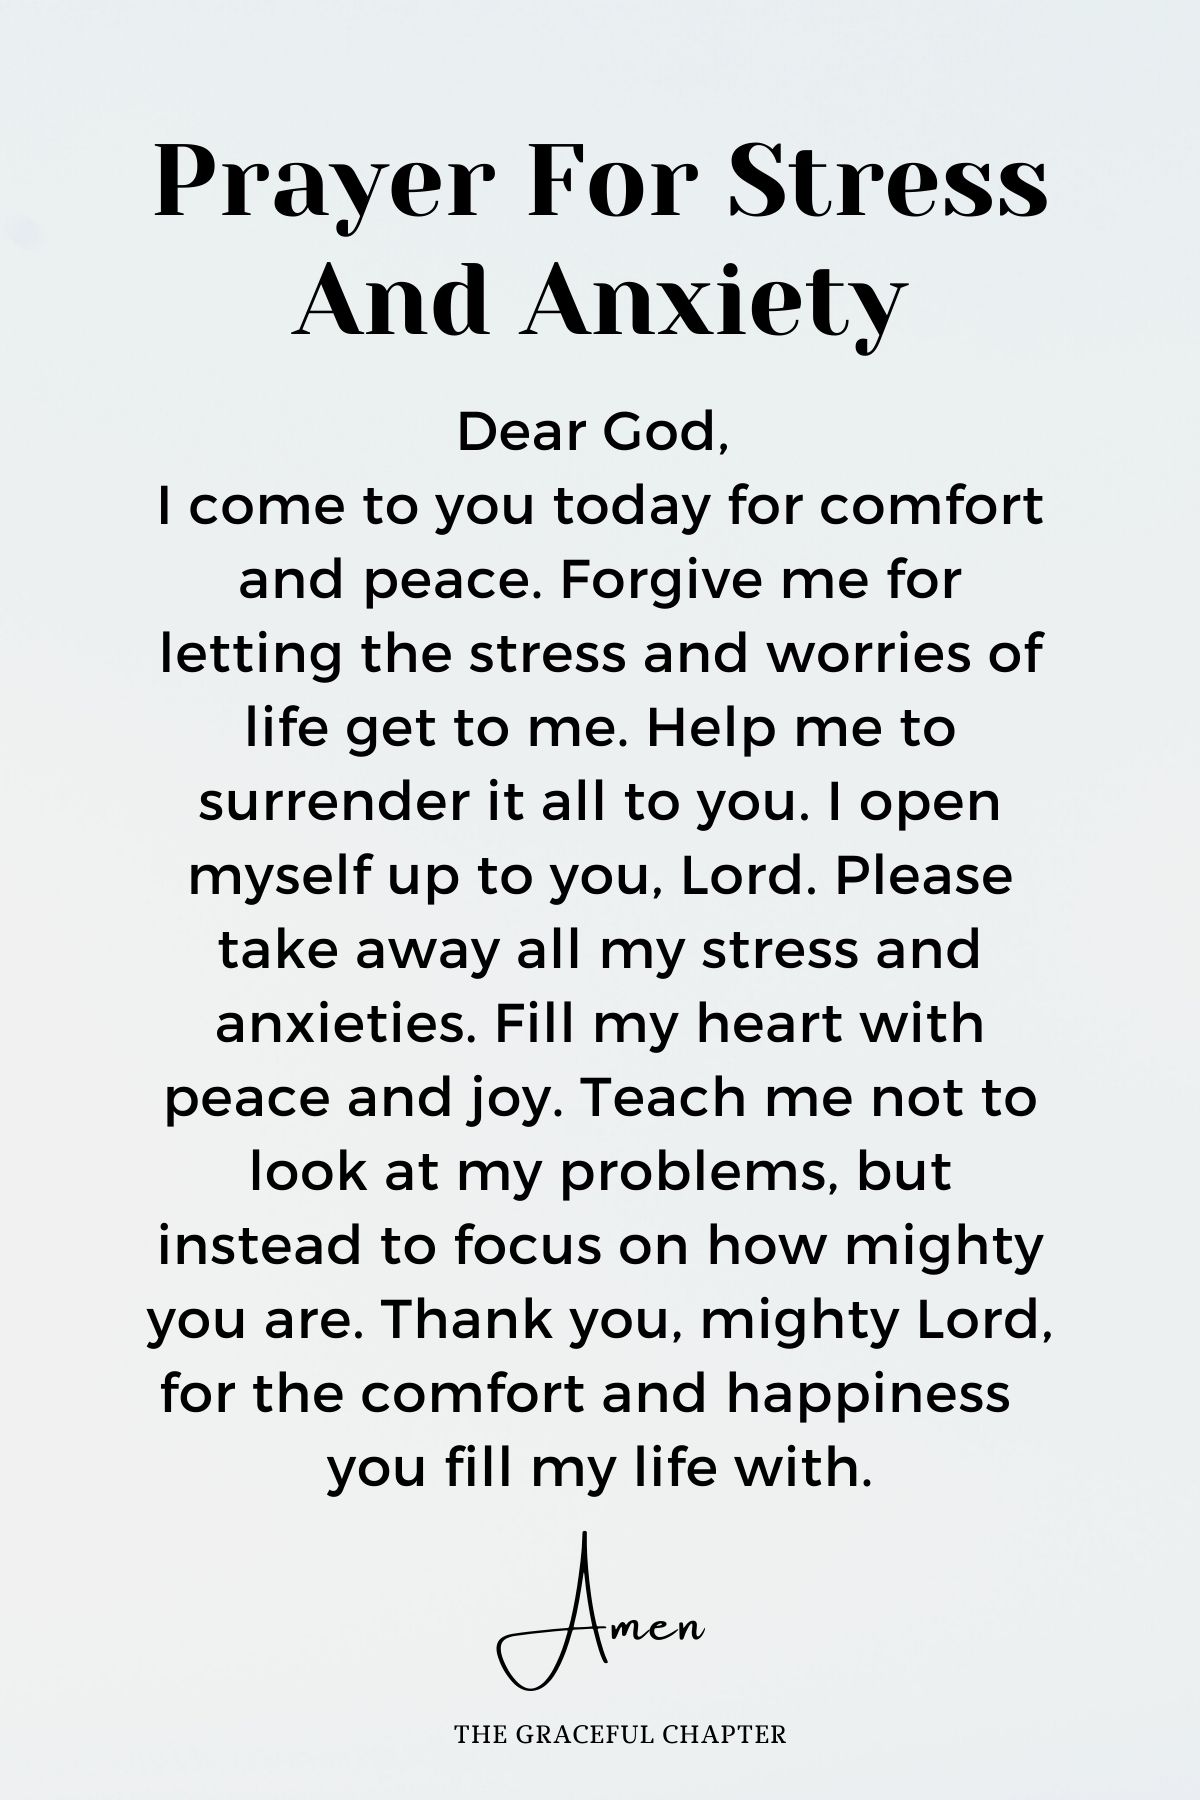 Prayers for stress and anxiety